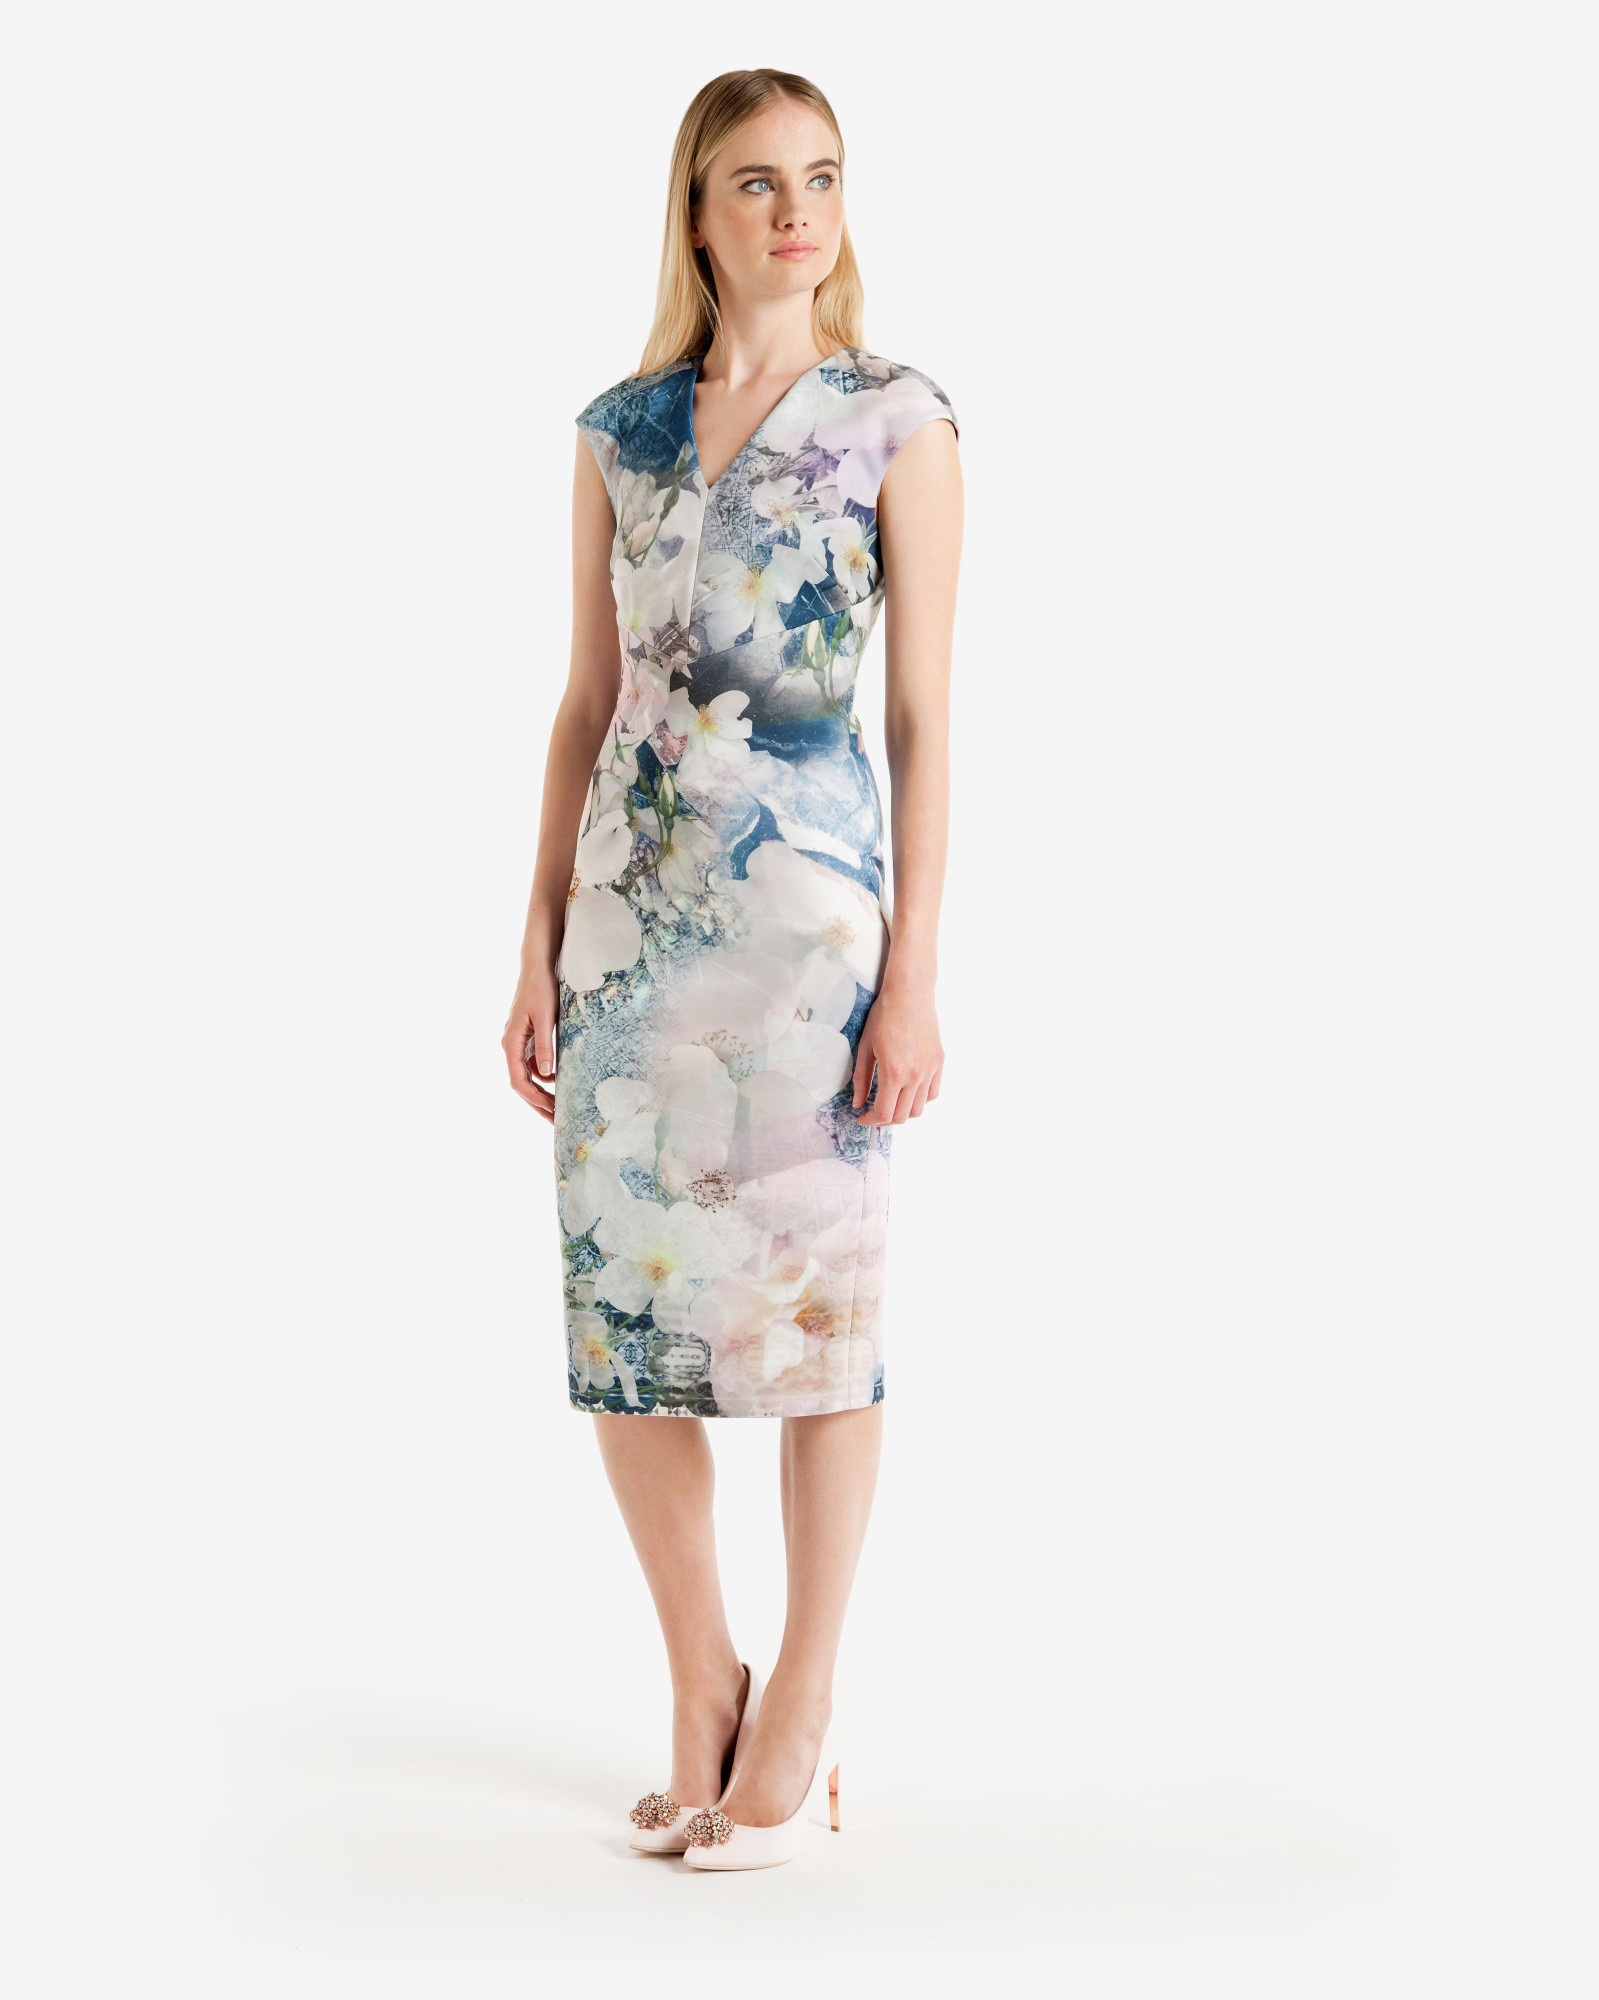 Lyst - Ted Baker Amily Floral Geo Midi Dress in Blue